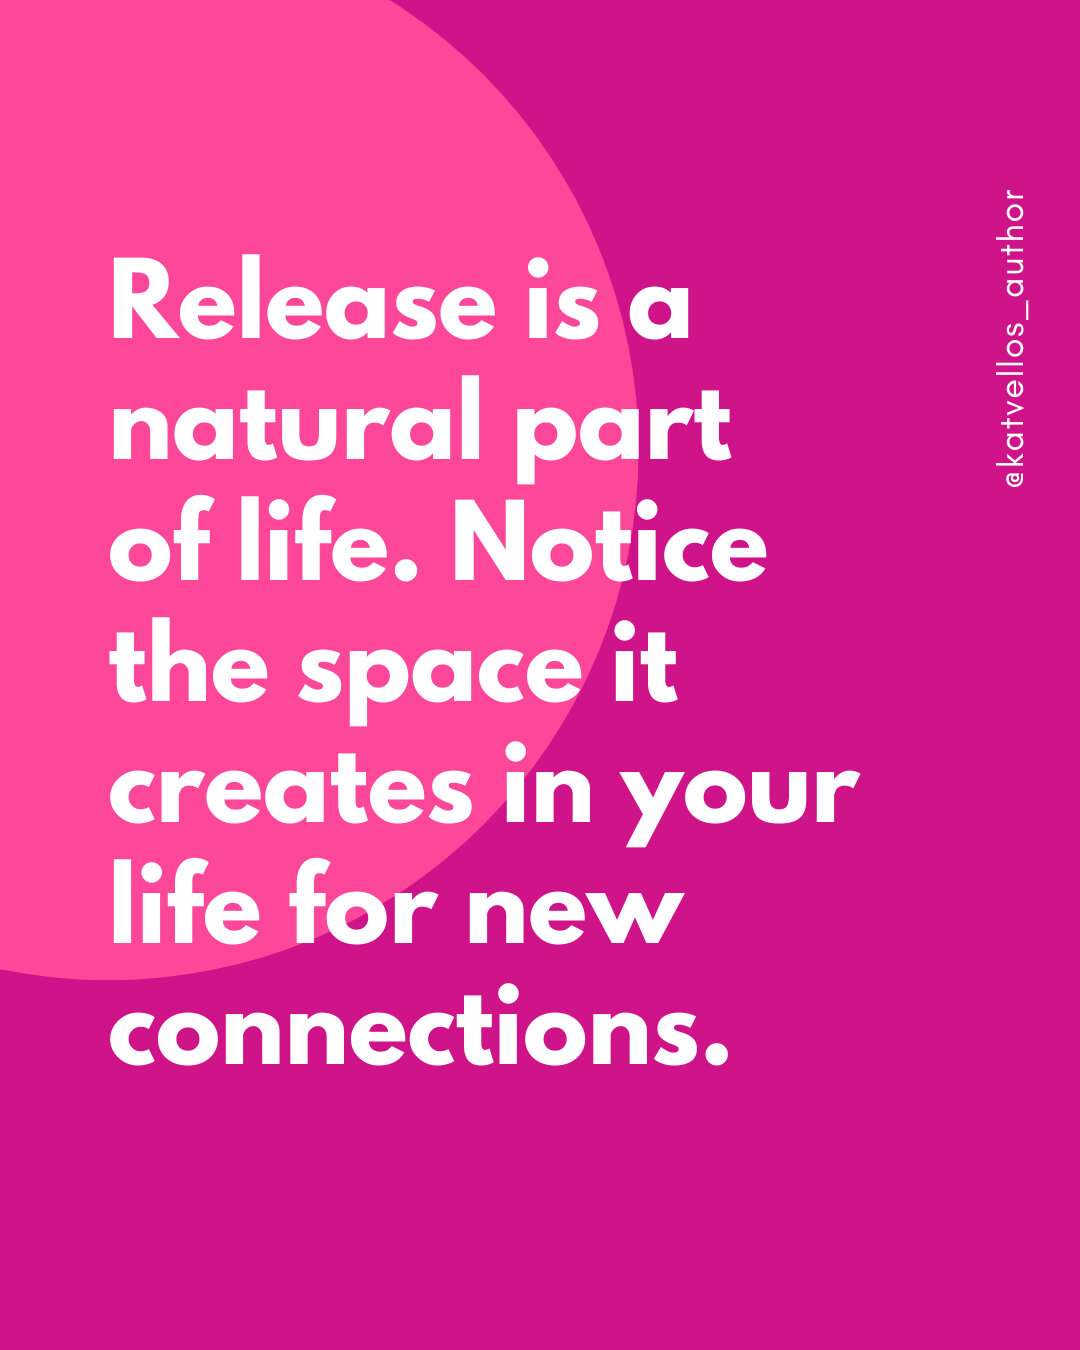 Need to let go of a friendship? Go gently if you're having a hard time with that. Try to remember that release is a natural part of life. Notice the space it creates in your life for new connections. 🍃